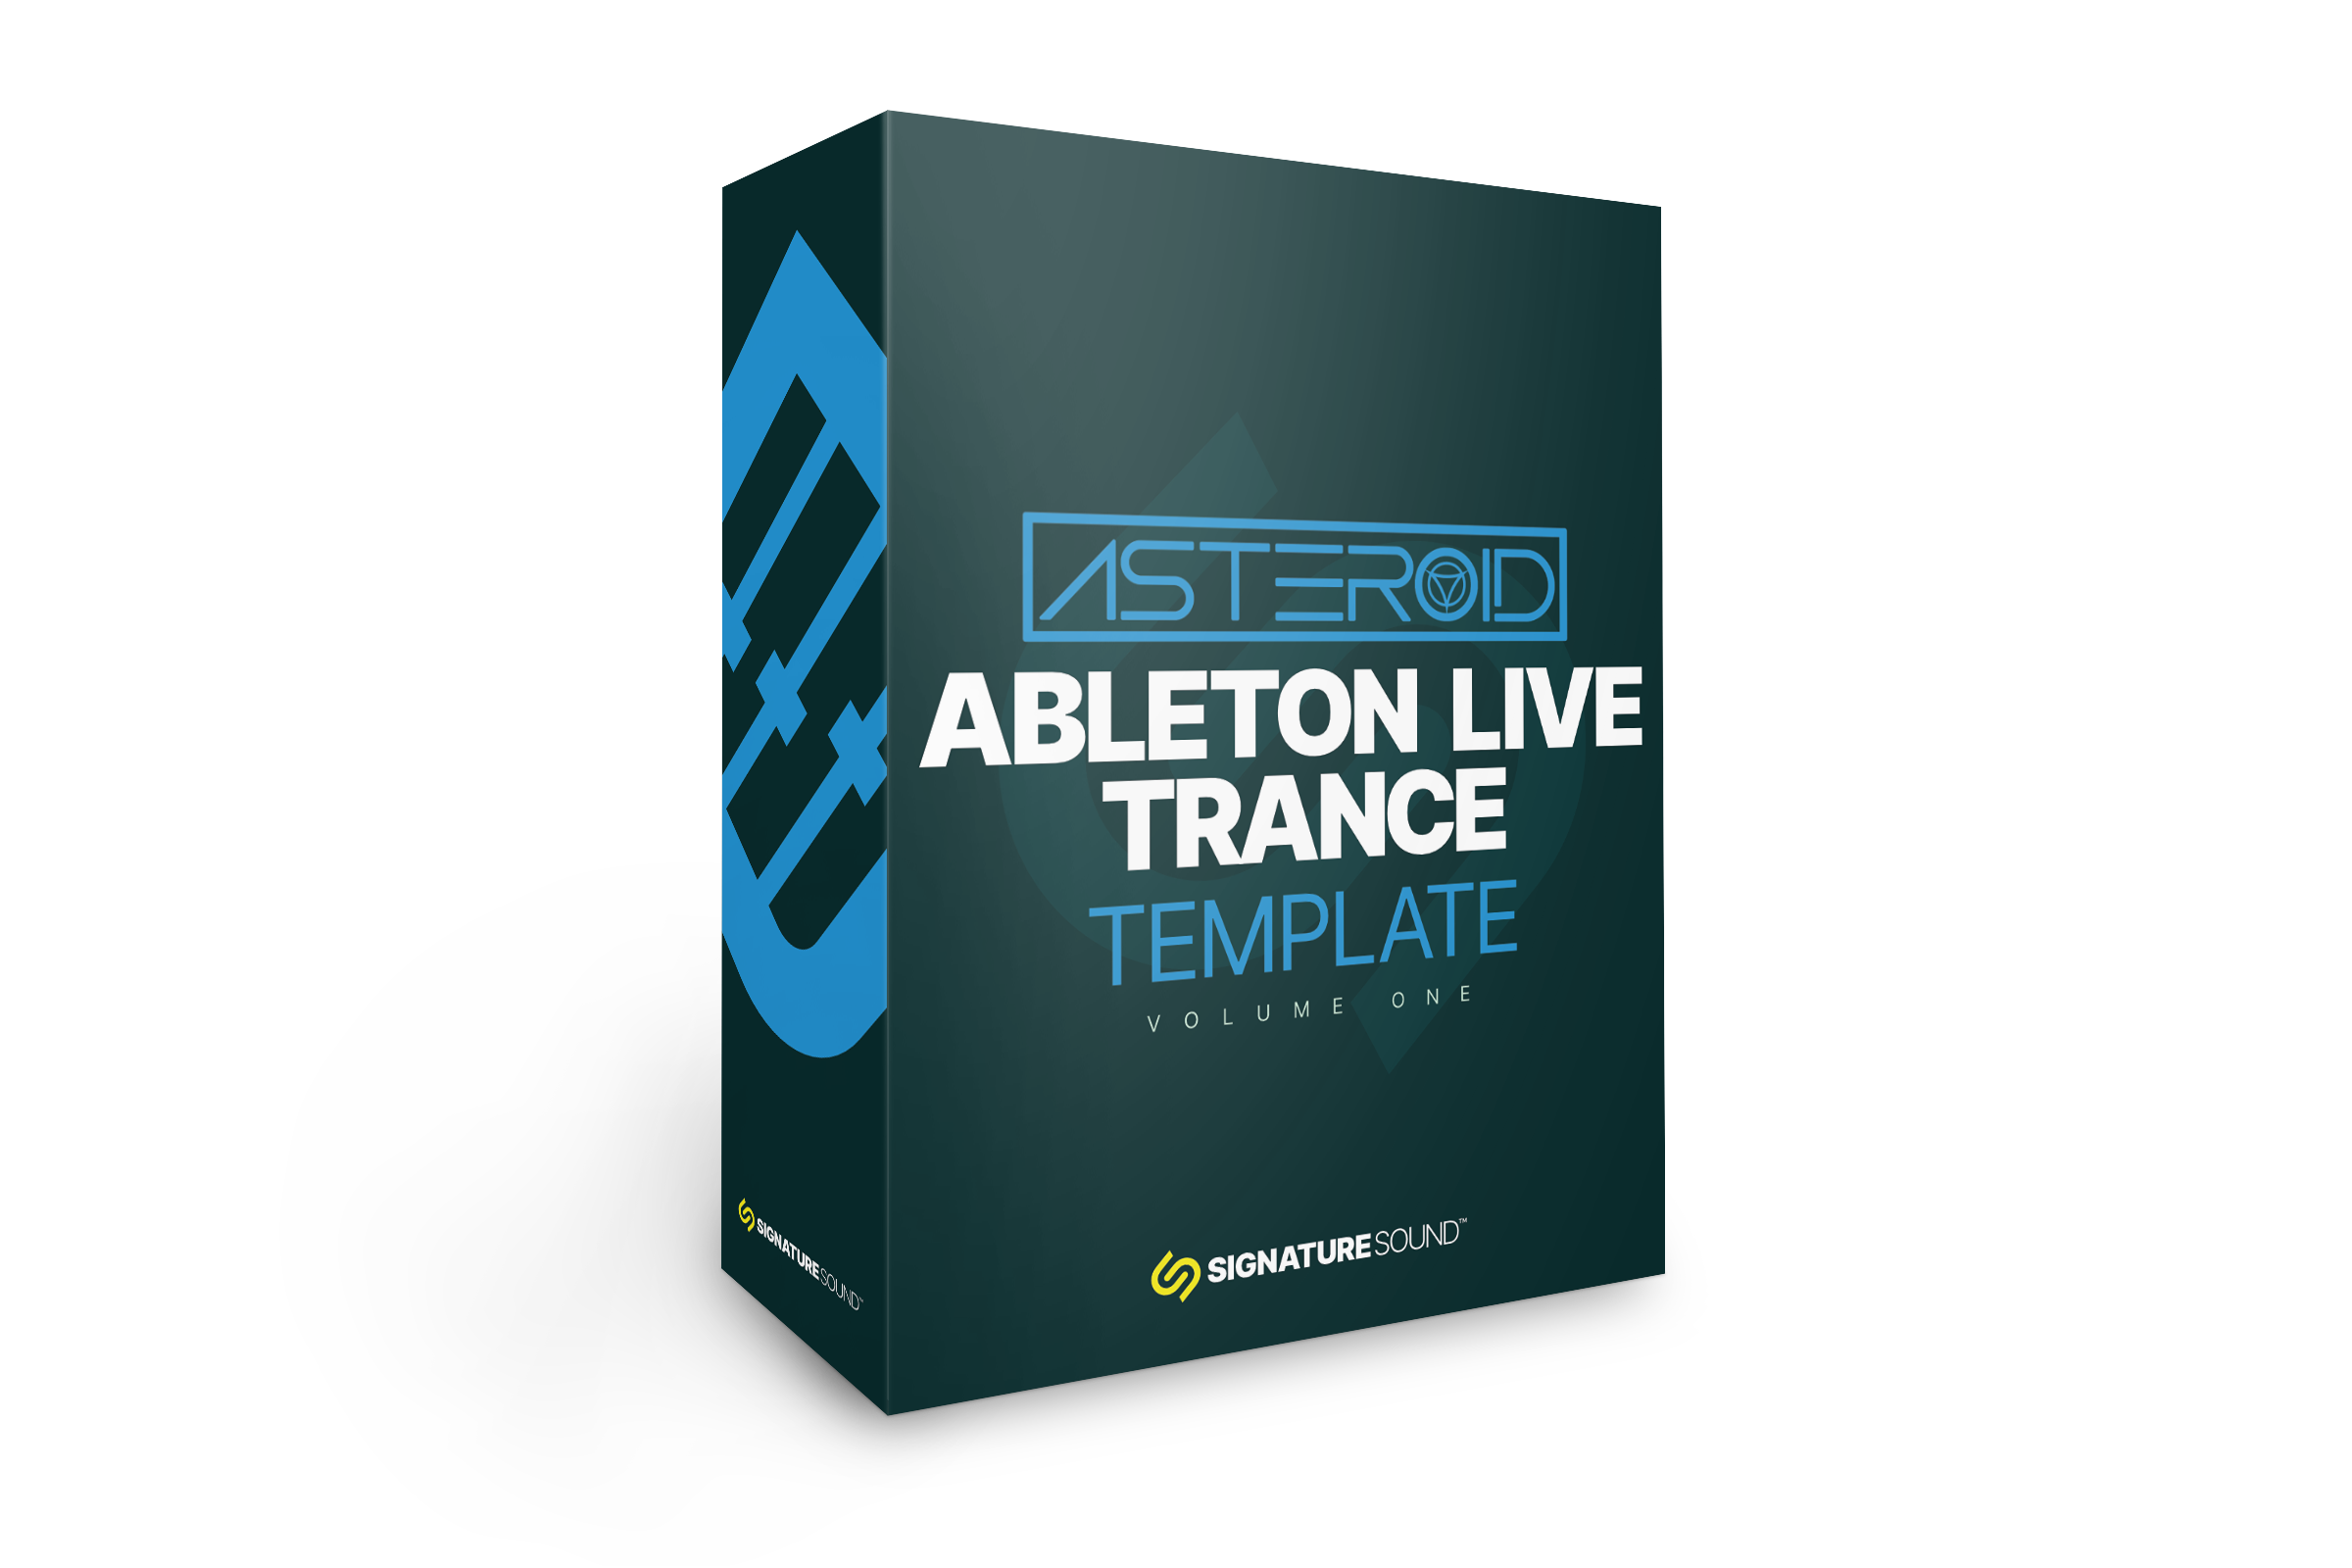 Asteroid Trance Template [Ableton Live] Volume One